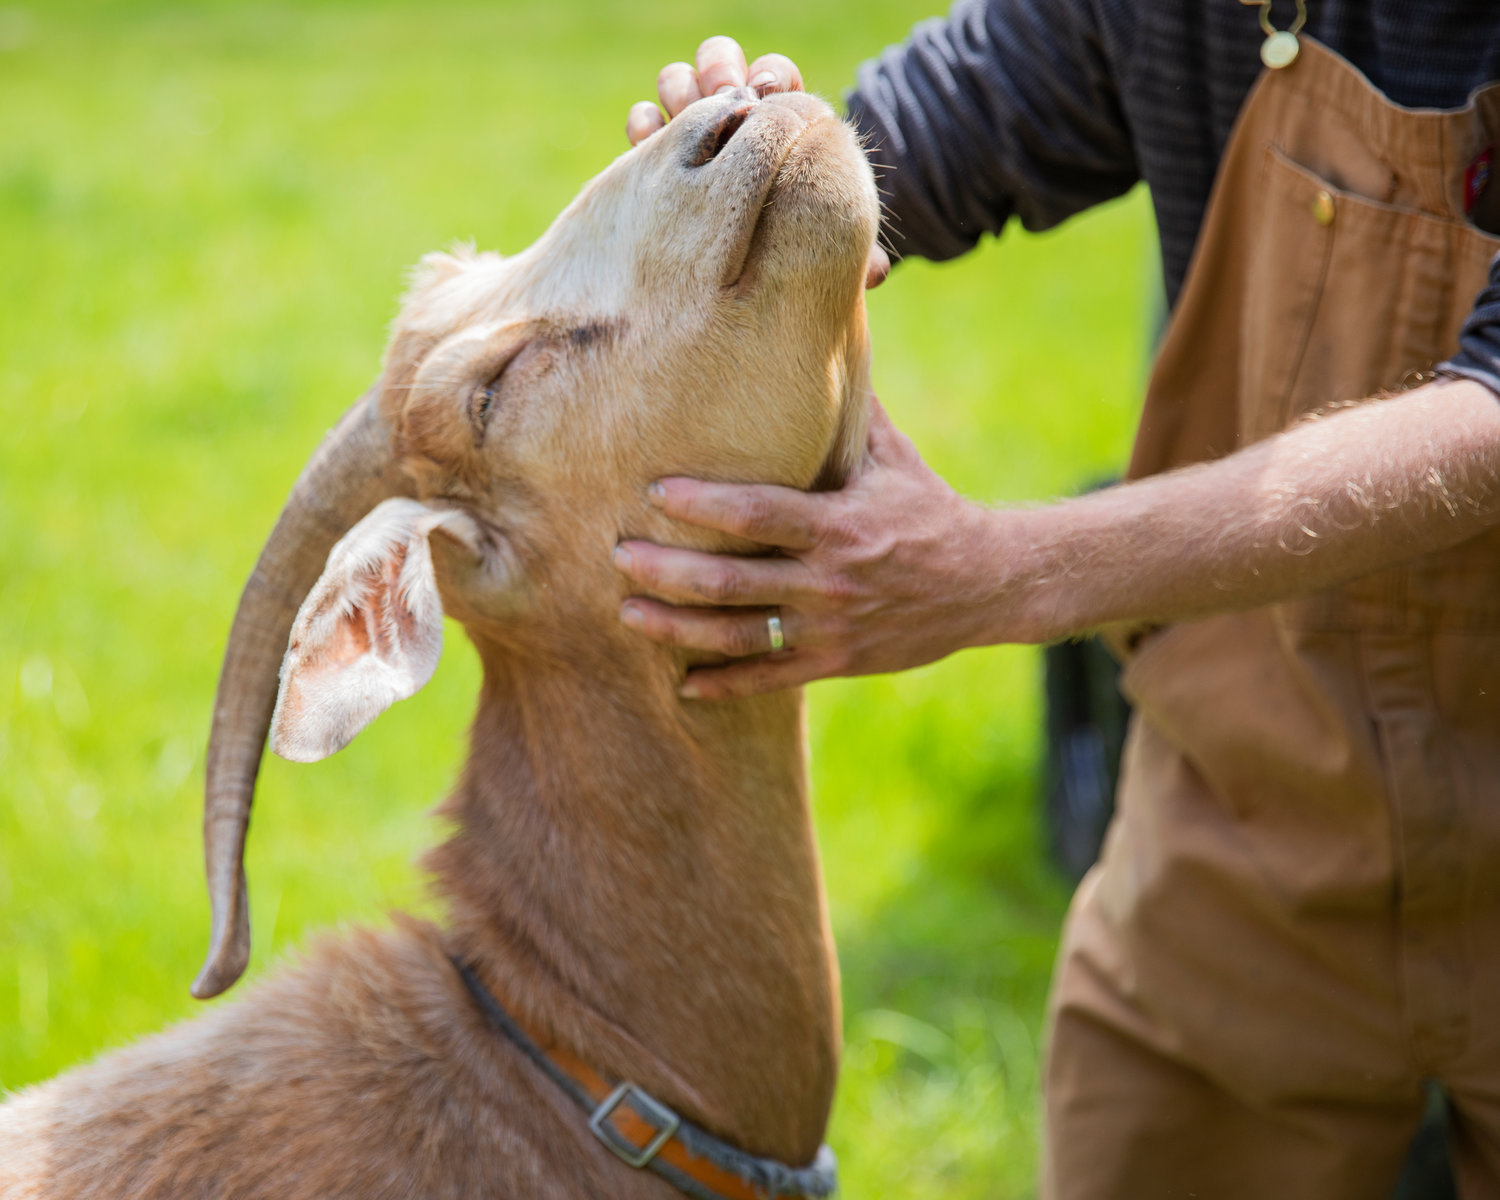 Brian Dennis pets a goat on his property near Toledo.